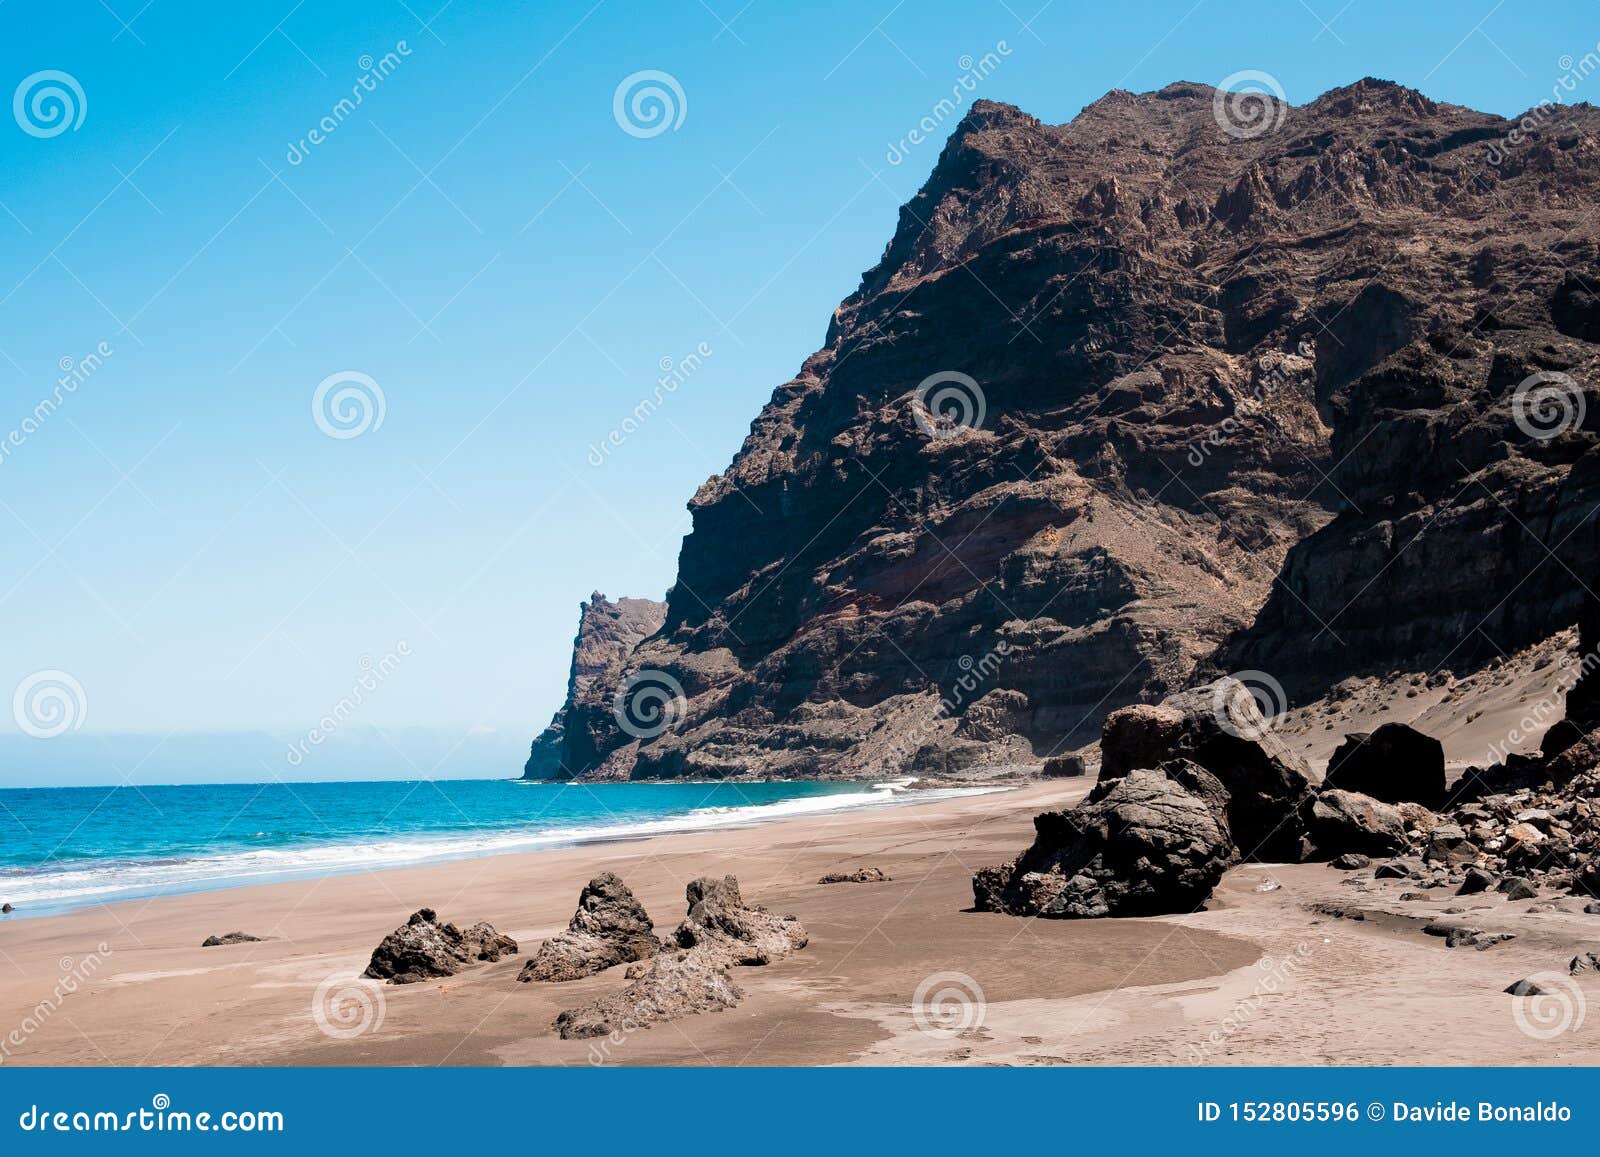 scenic view of gui gui beach in gran canaria island in spain with spectacular mountains landscape and clear blue sky and sandy